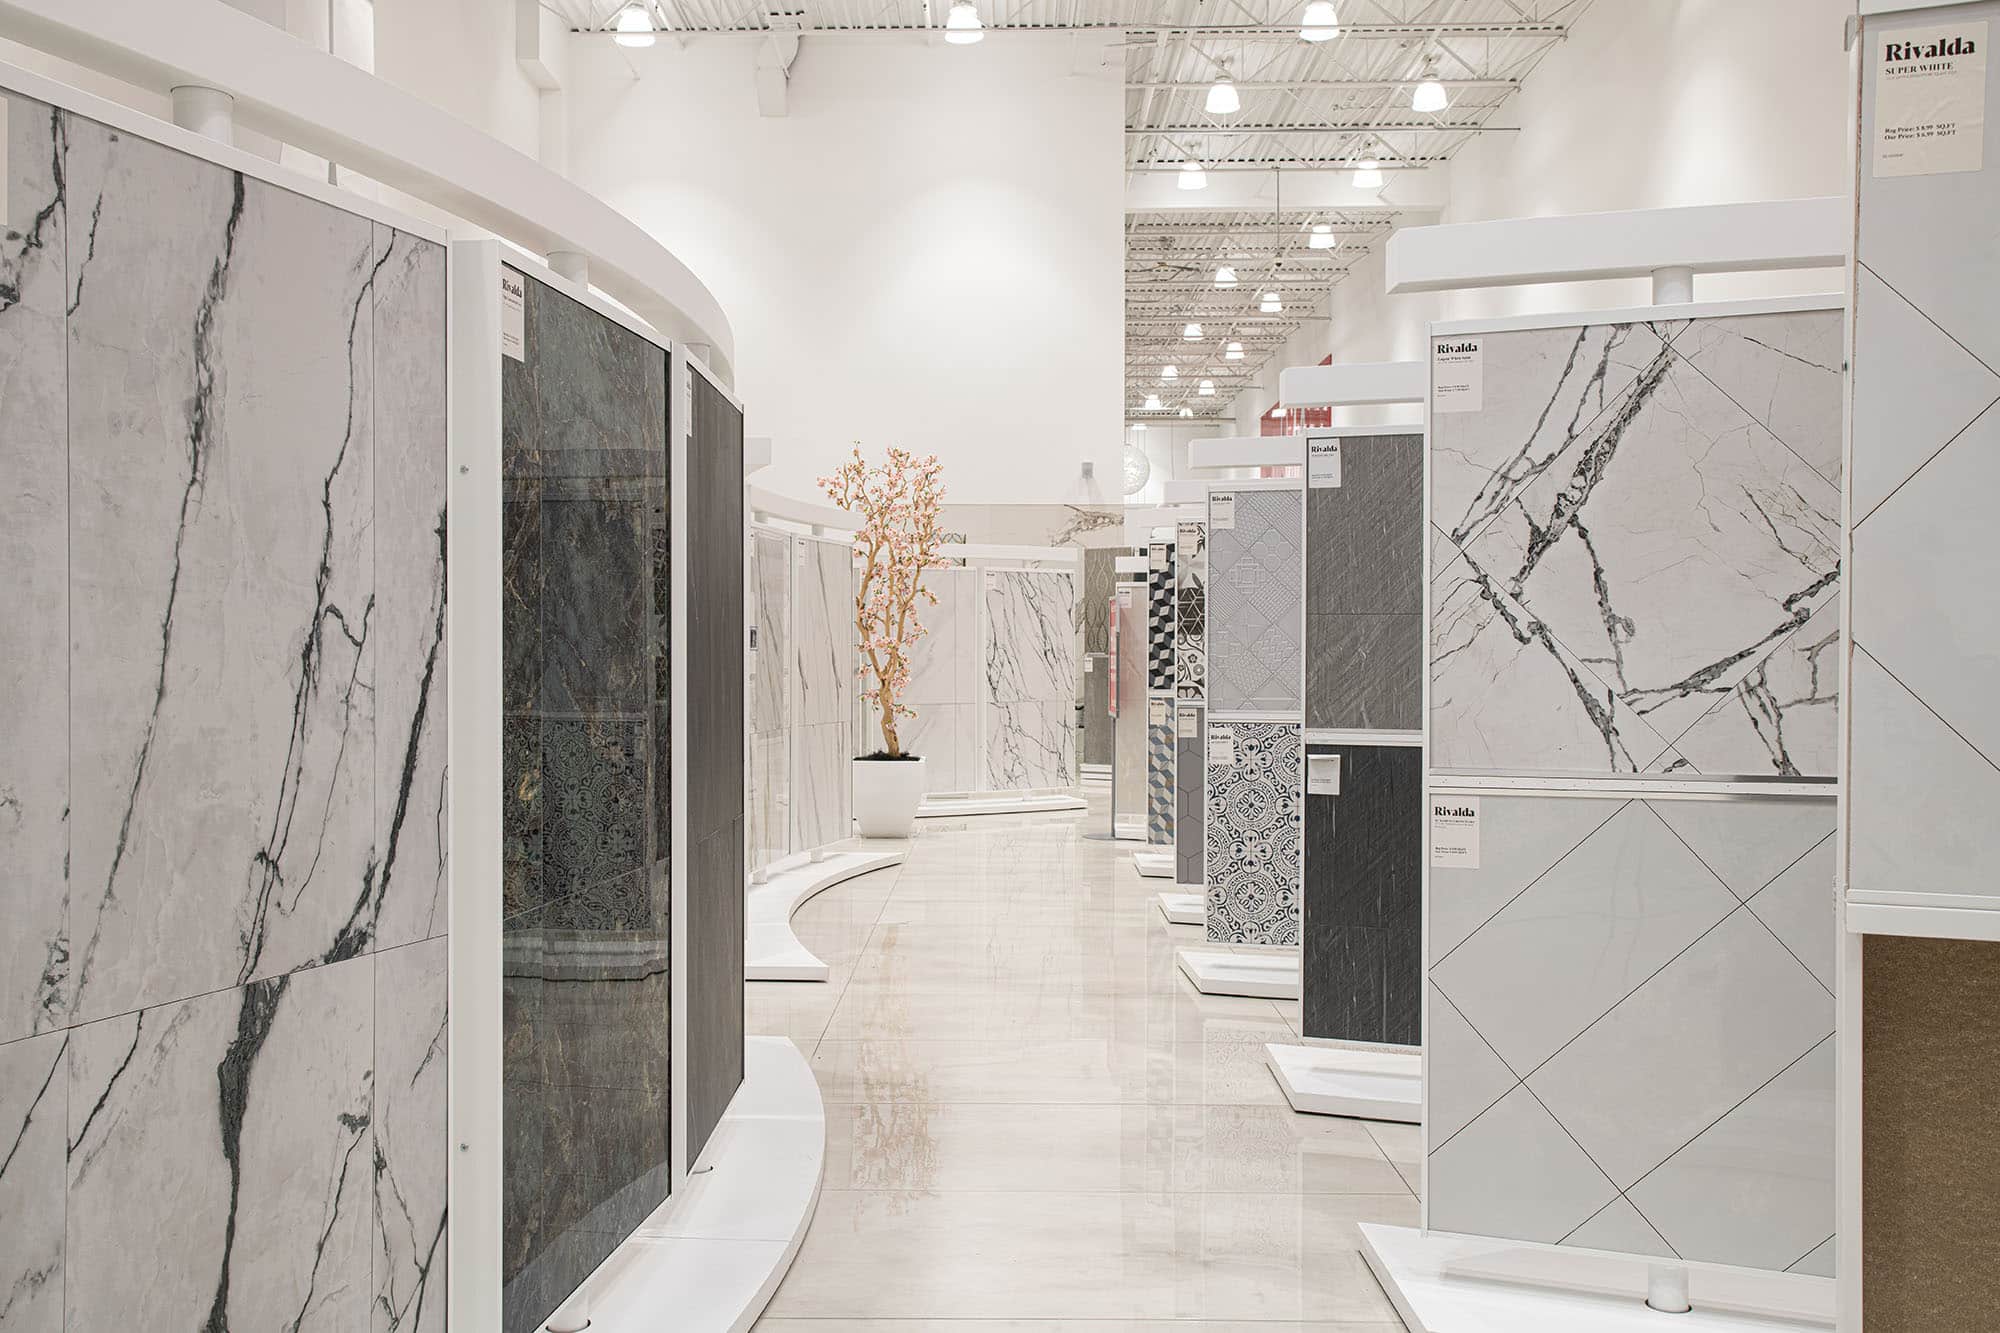 Tile store with a diverse range of styles